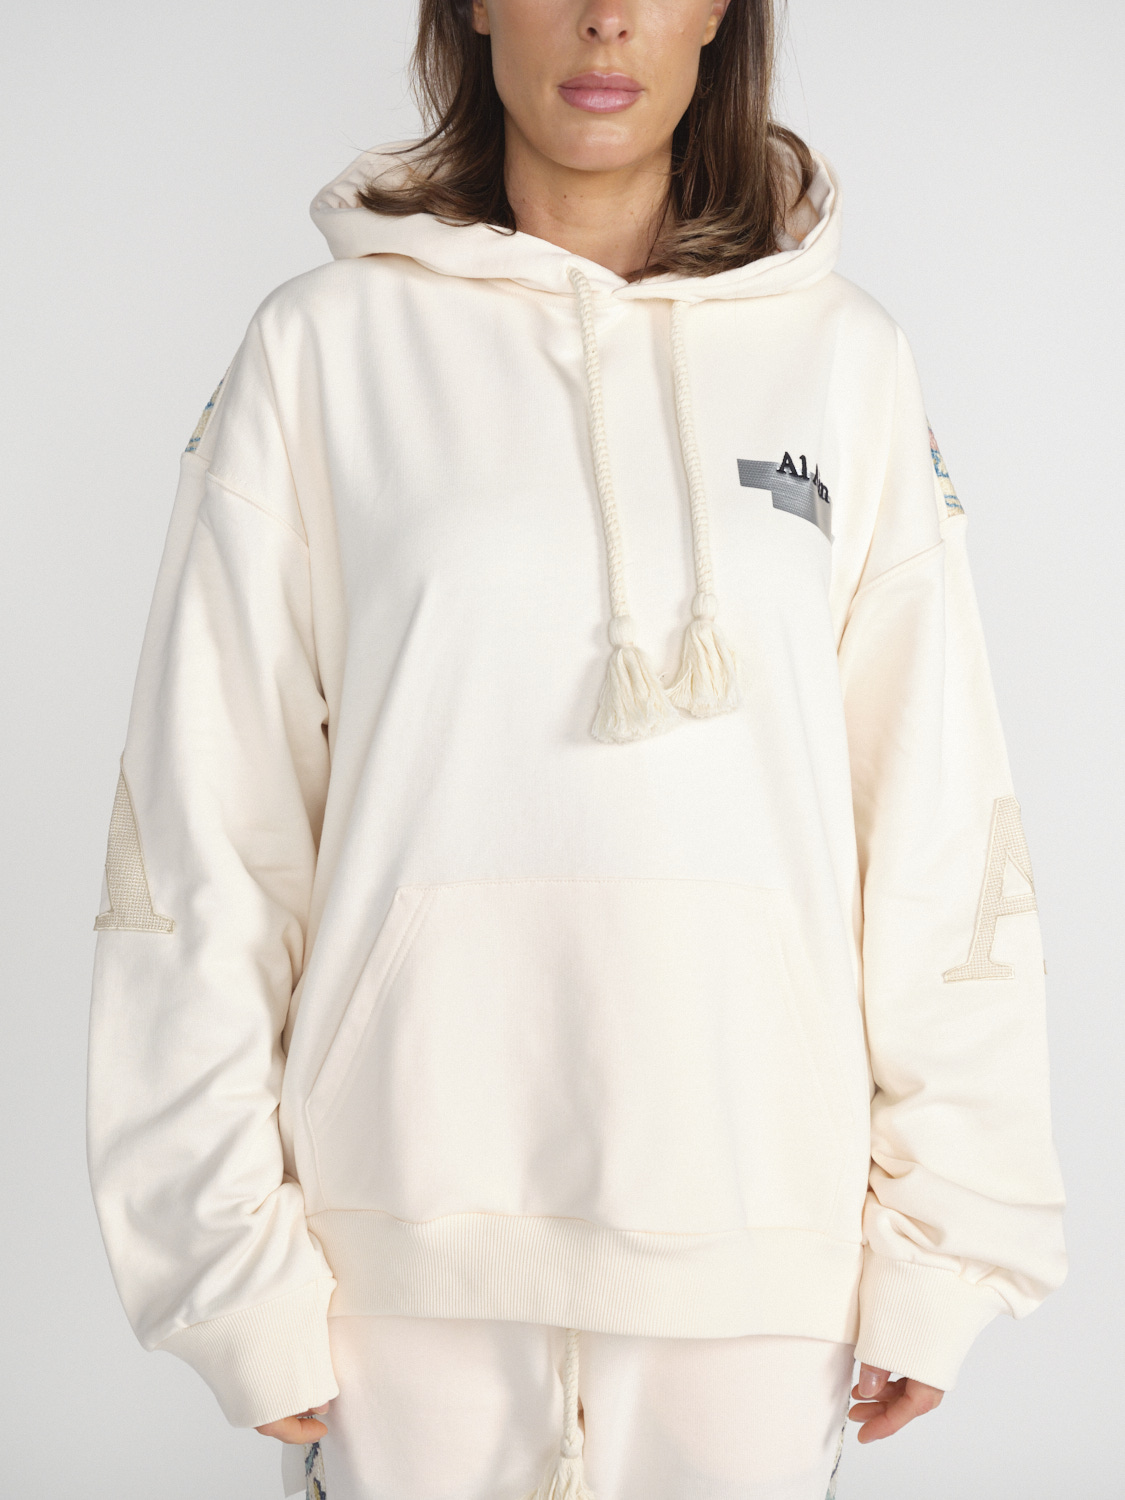 Al Ain Ahox - Oversized Hoodie mit Muster  creme XS/S